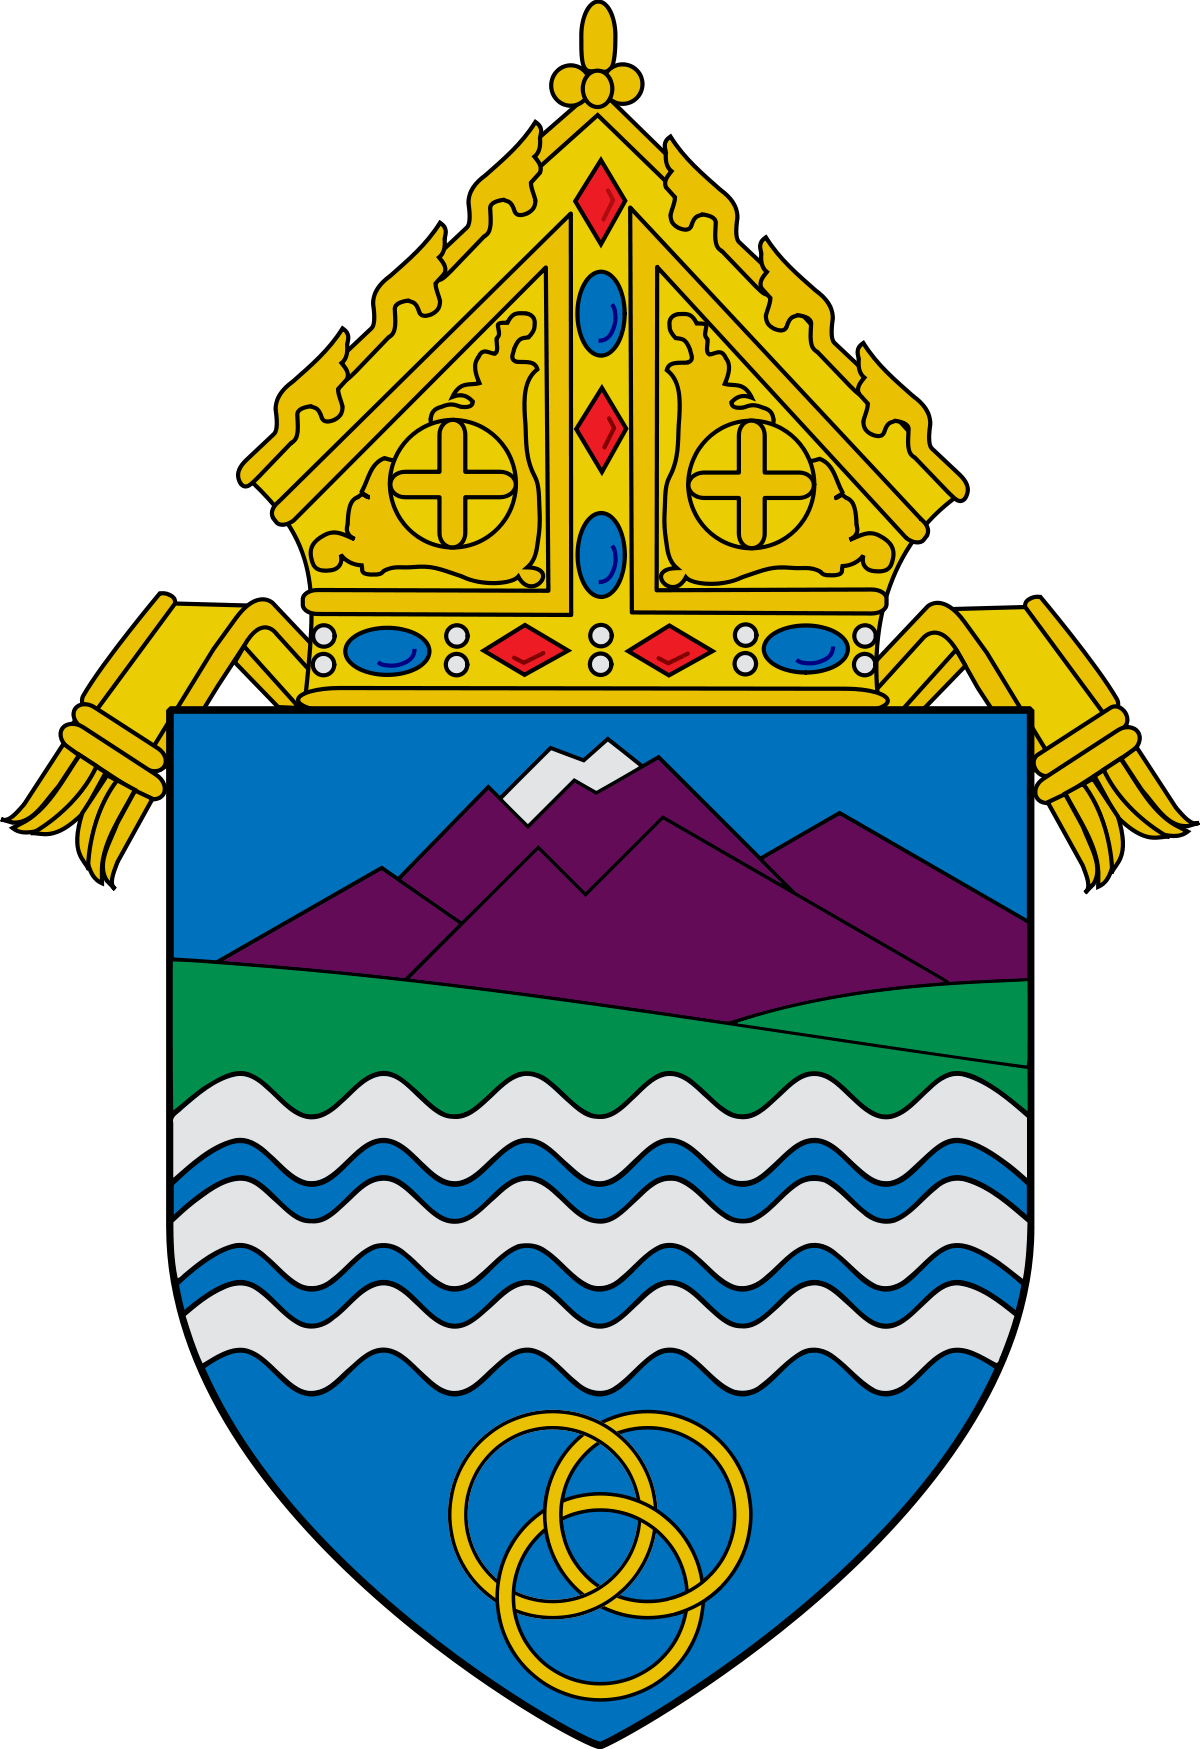 The Catholic Diocese of Colorado Springs 